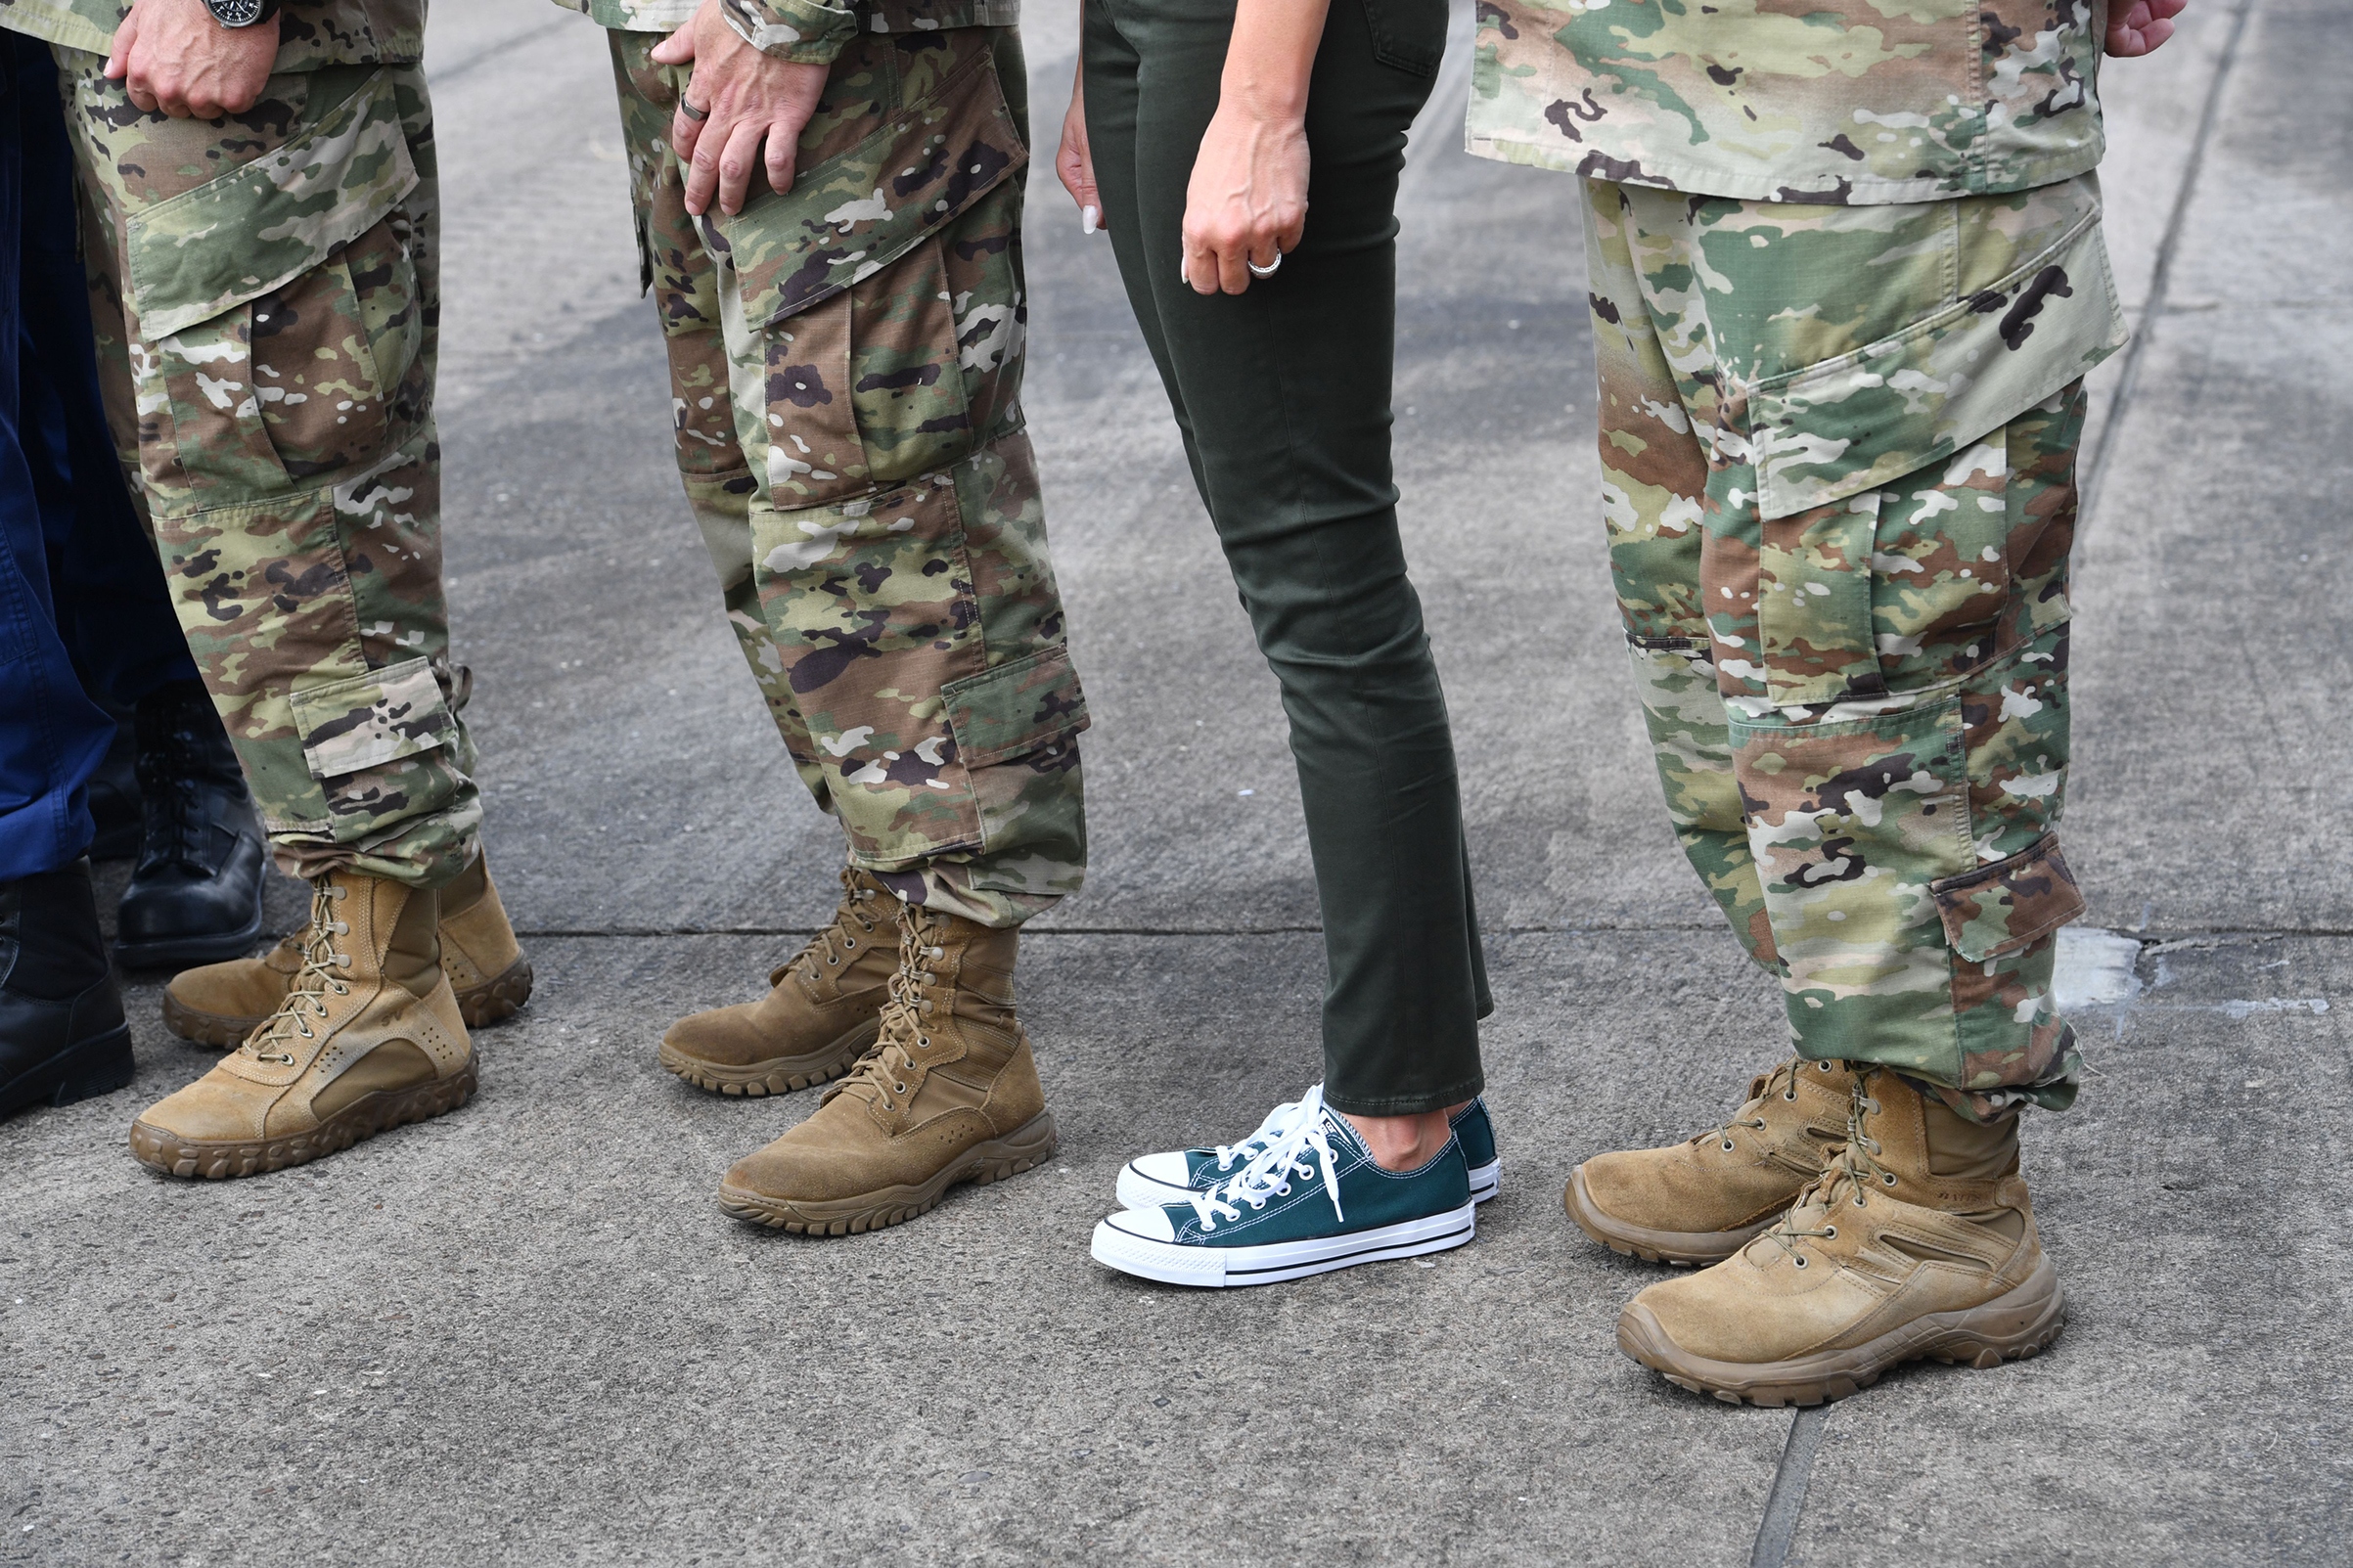 First lady Melania Trump wearing Converse sneakers, stands with military personnel at Ellington Field on Sept. 2, 2017, before departing for Louisiana to continue their tour of areas affected by Hurricane Harvey.